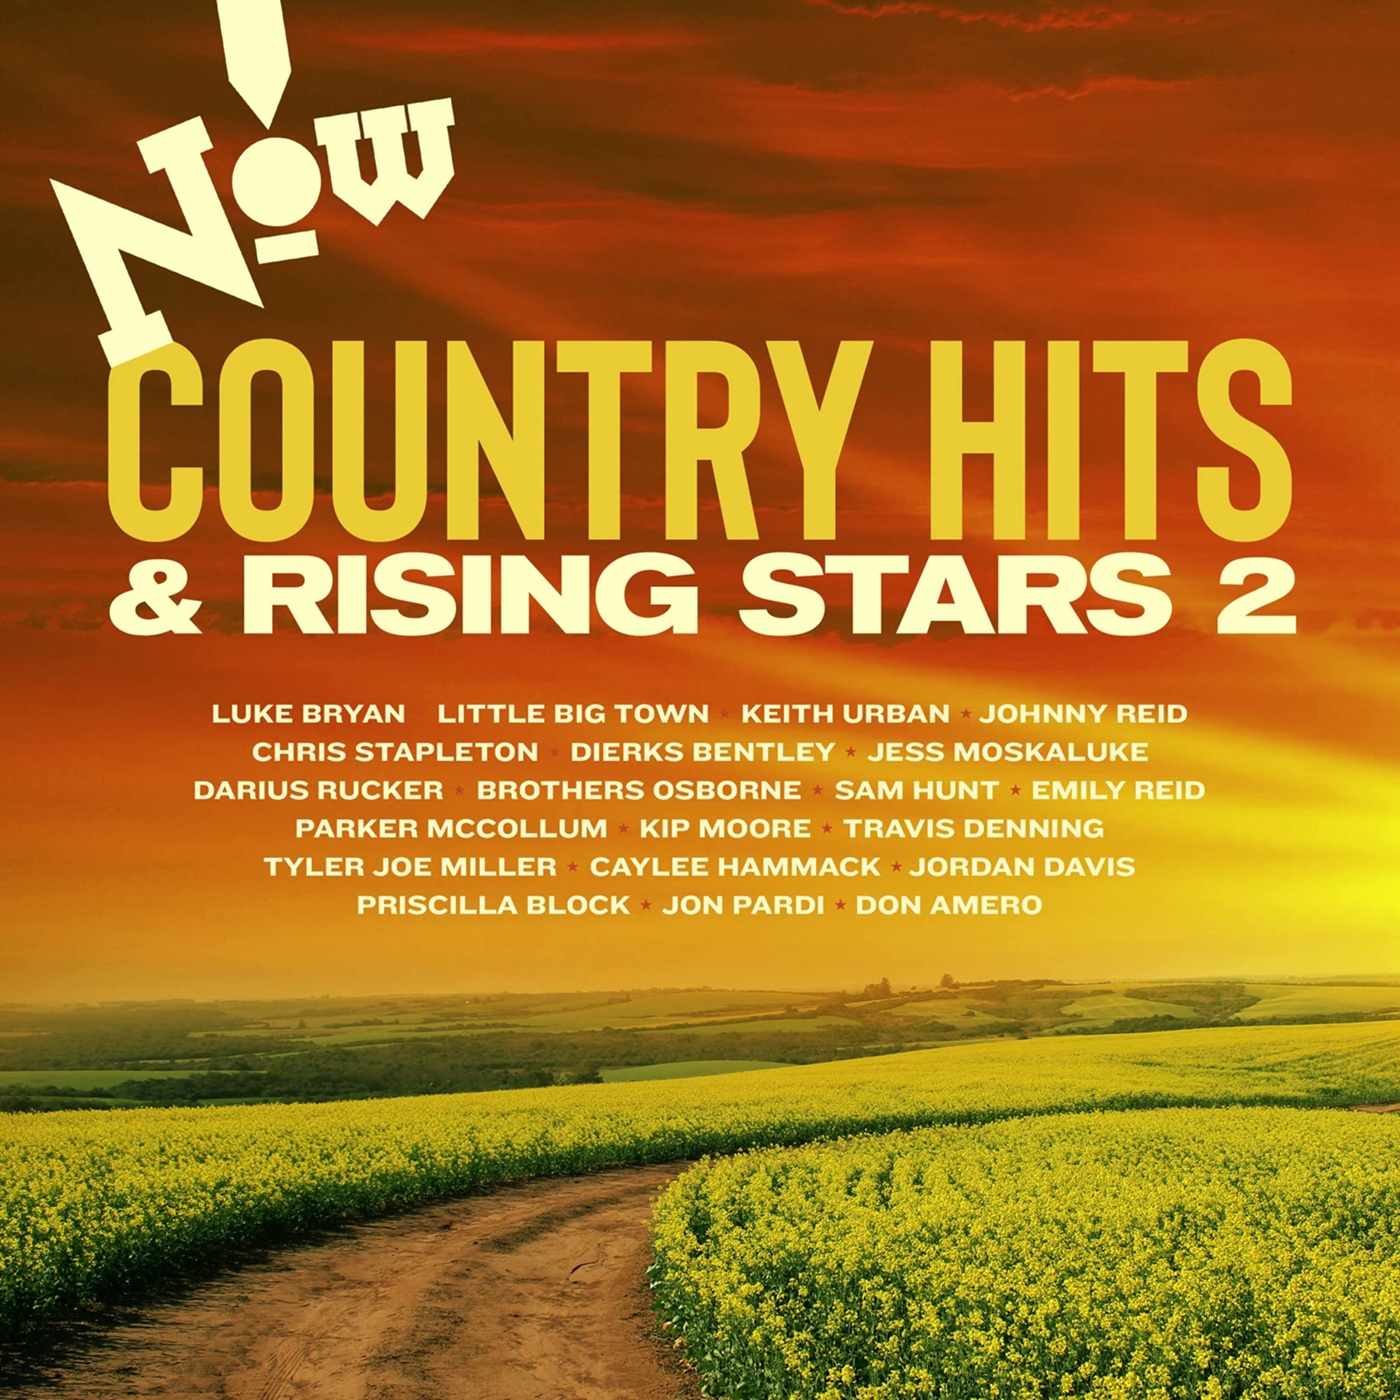 Country hits. Rising Star 2 обложка. Country Hits collection 1000х1000.